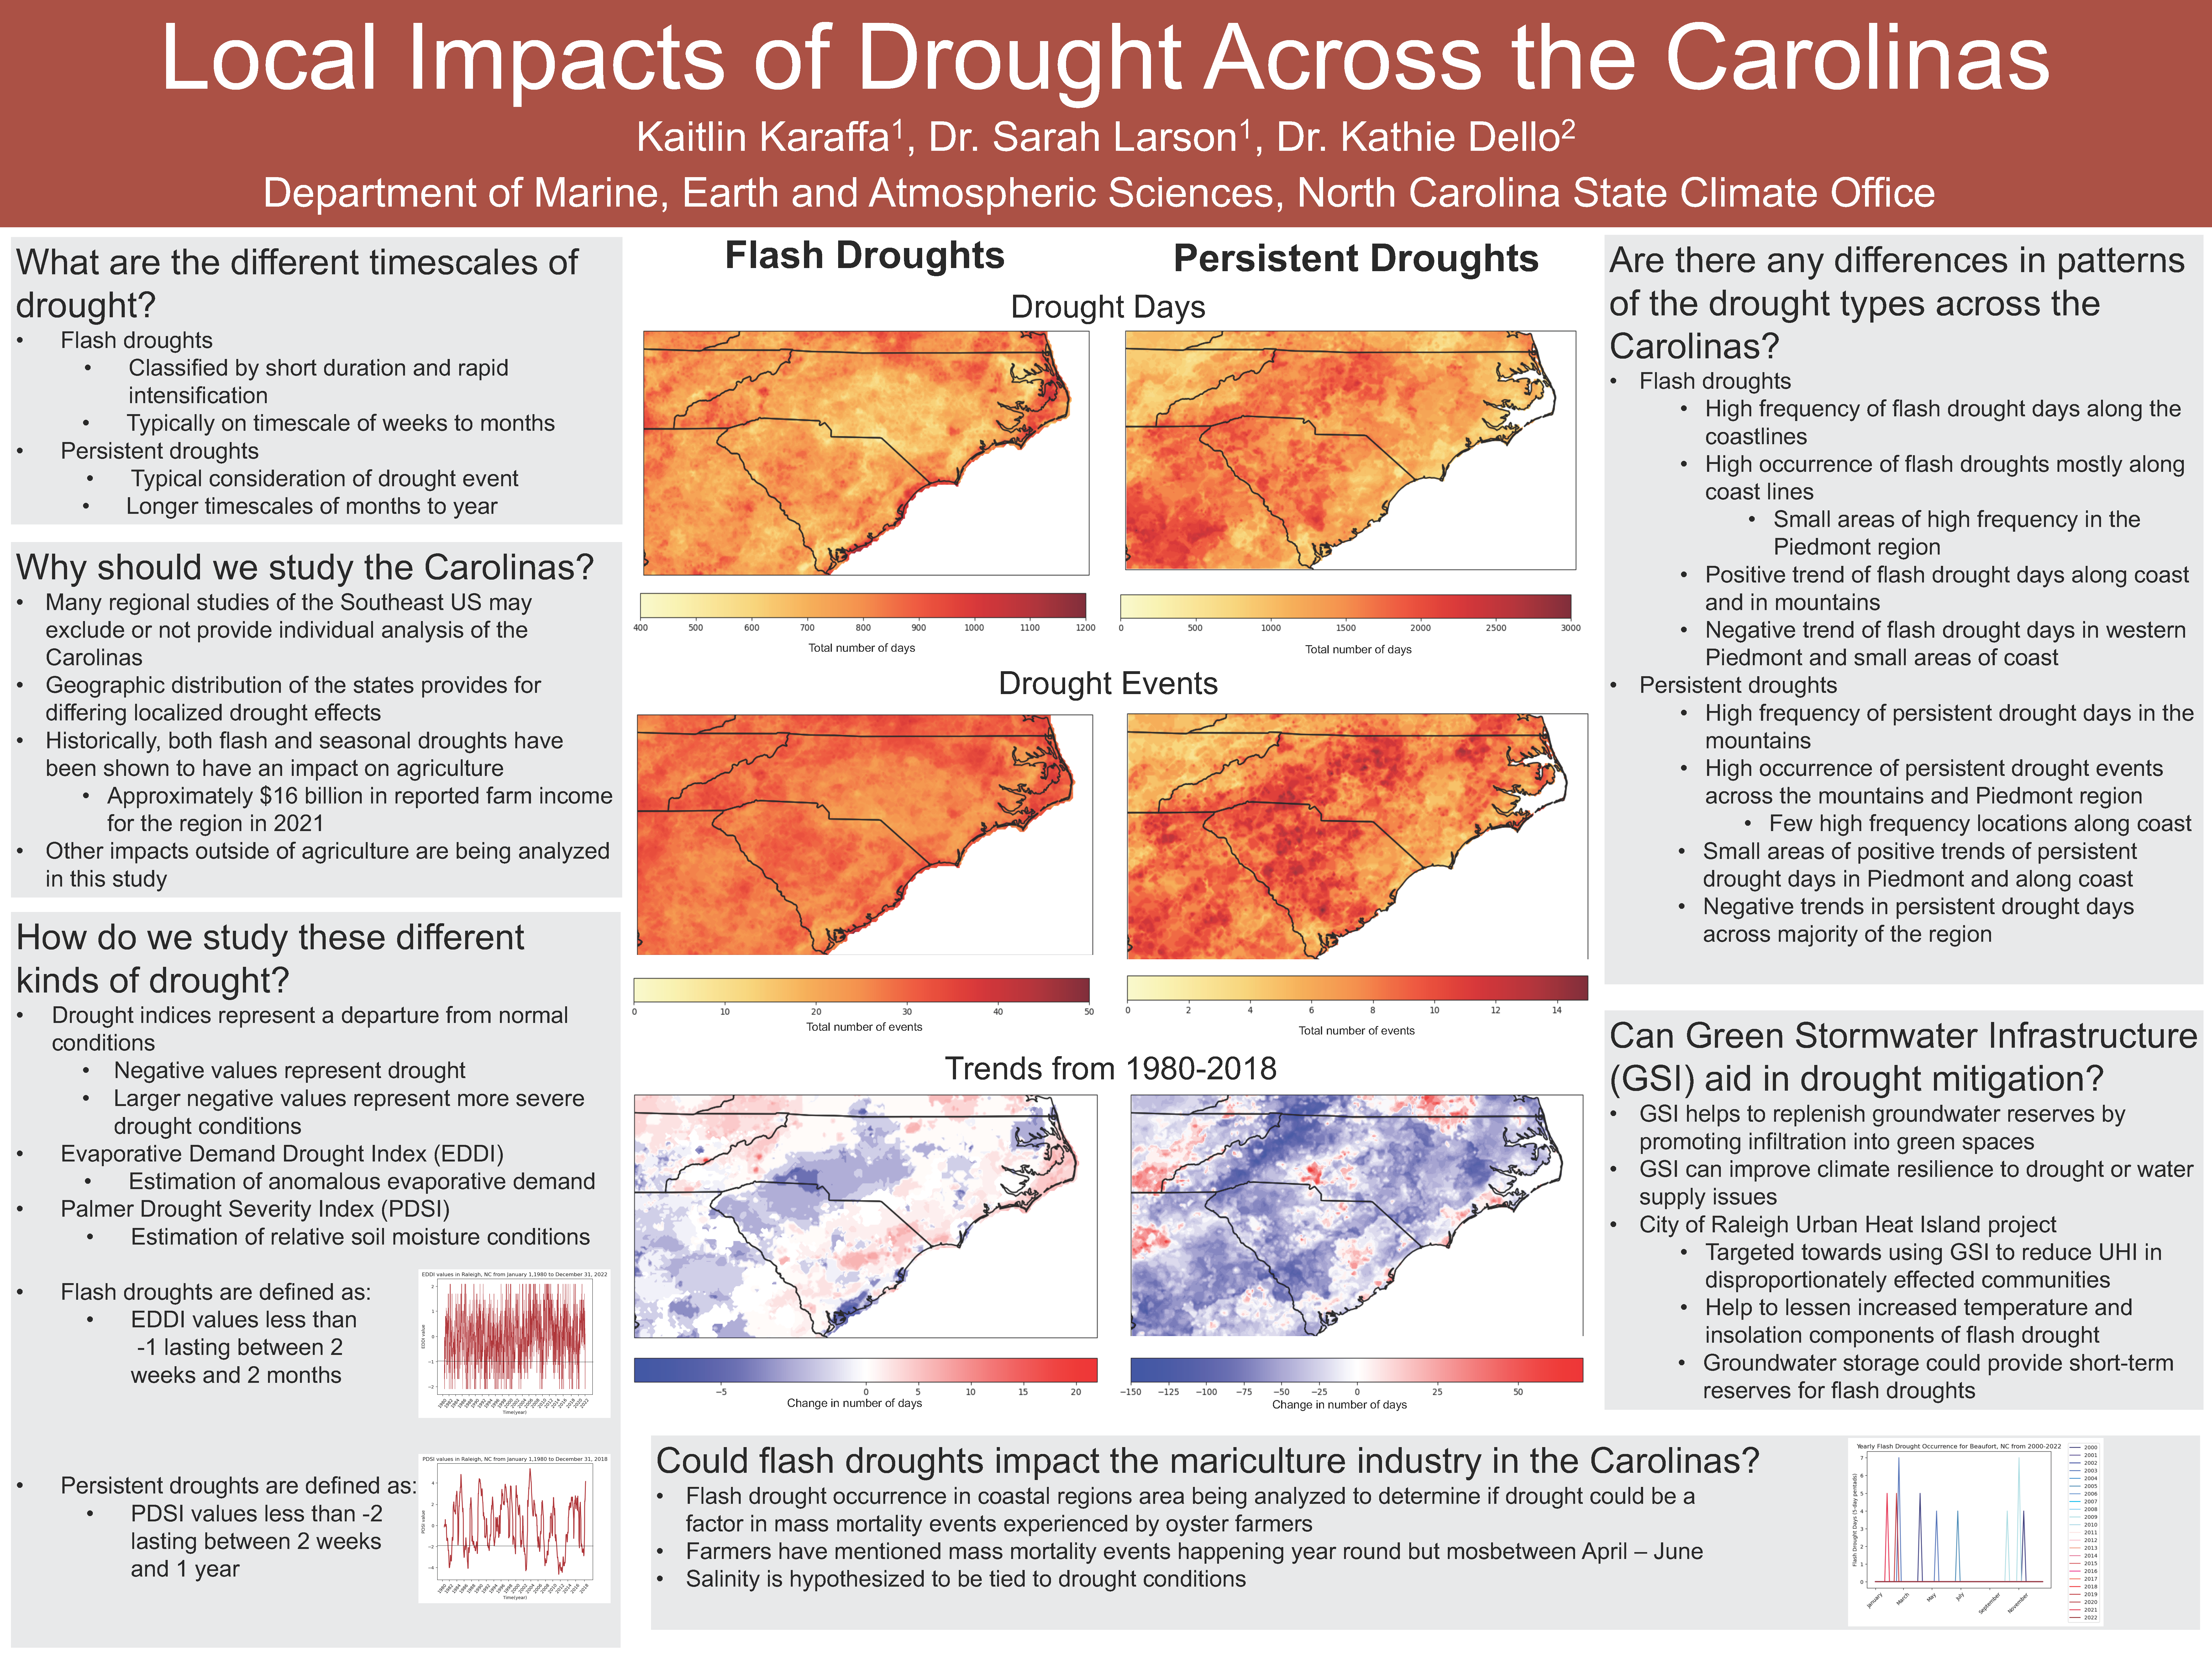 image of Kaitlin Karaffa's poster, "Local Impacts of Drought Across the Carolinas"